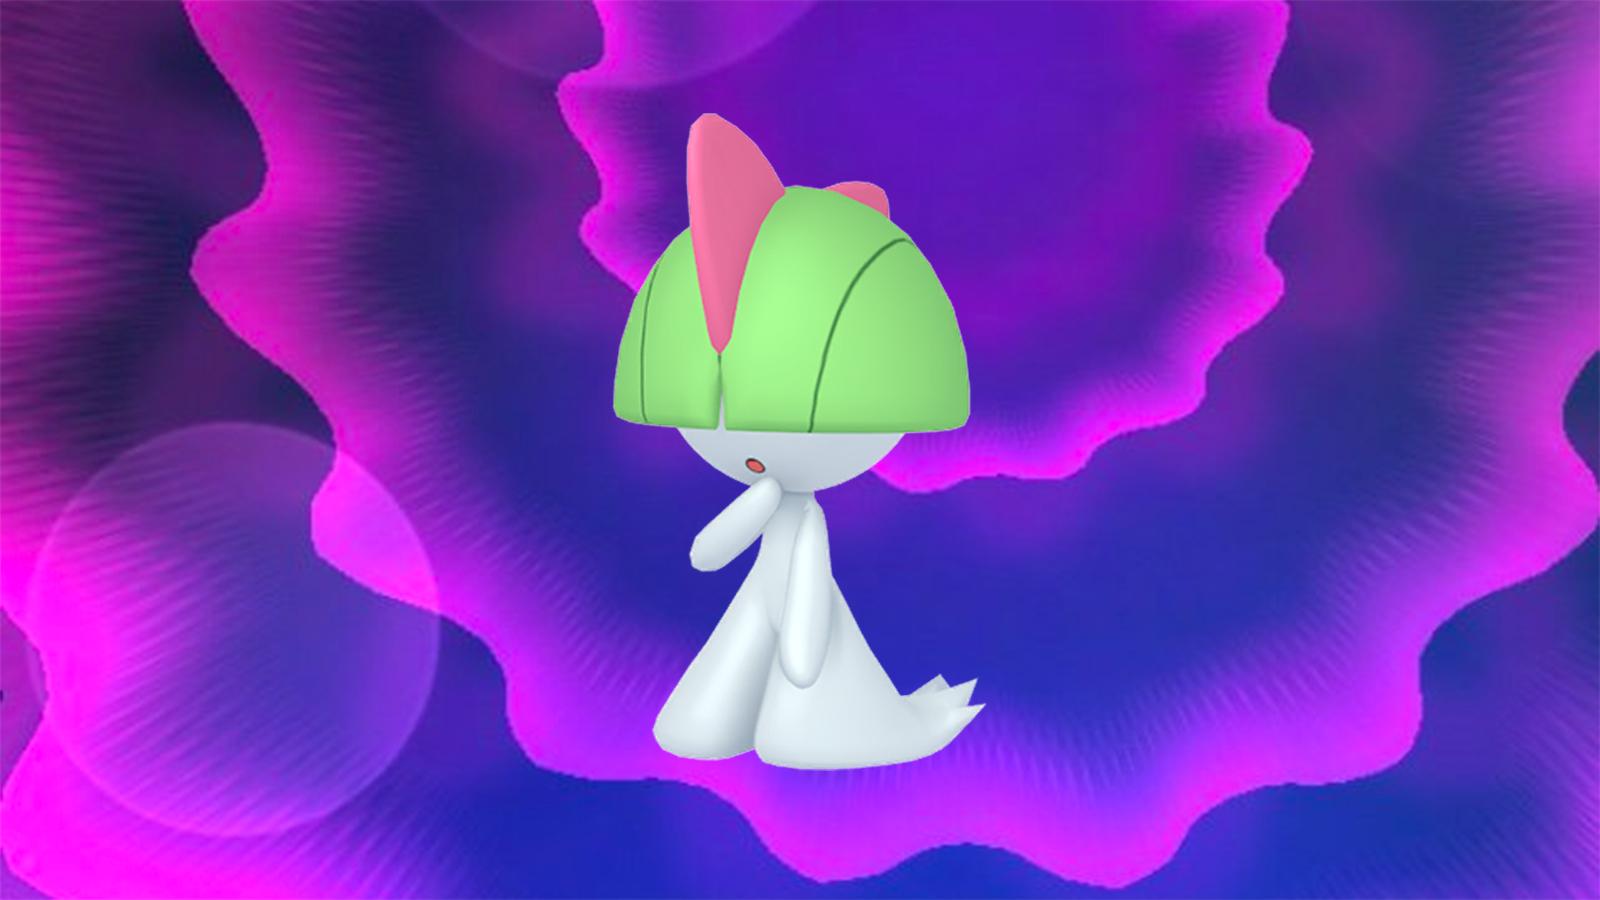 Ralts appearing in the Pokemon Go Spotlight Hour